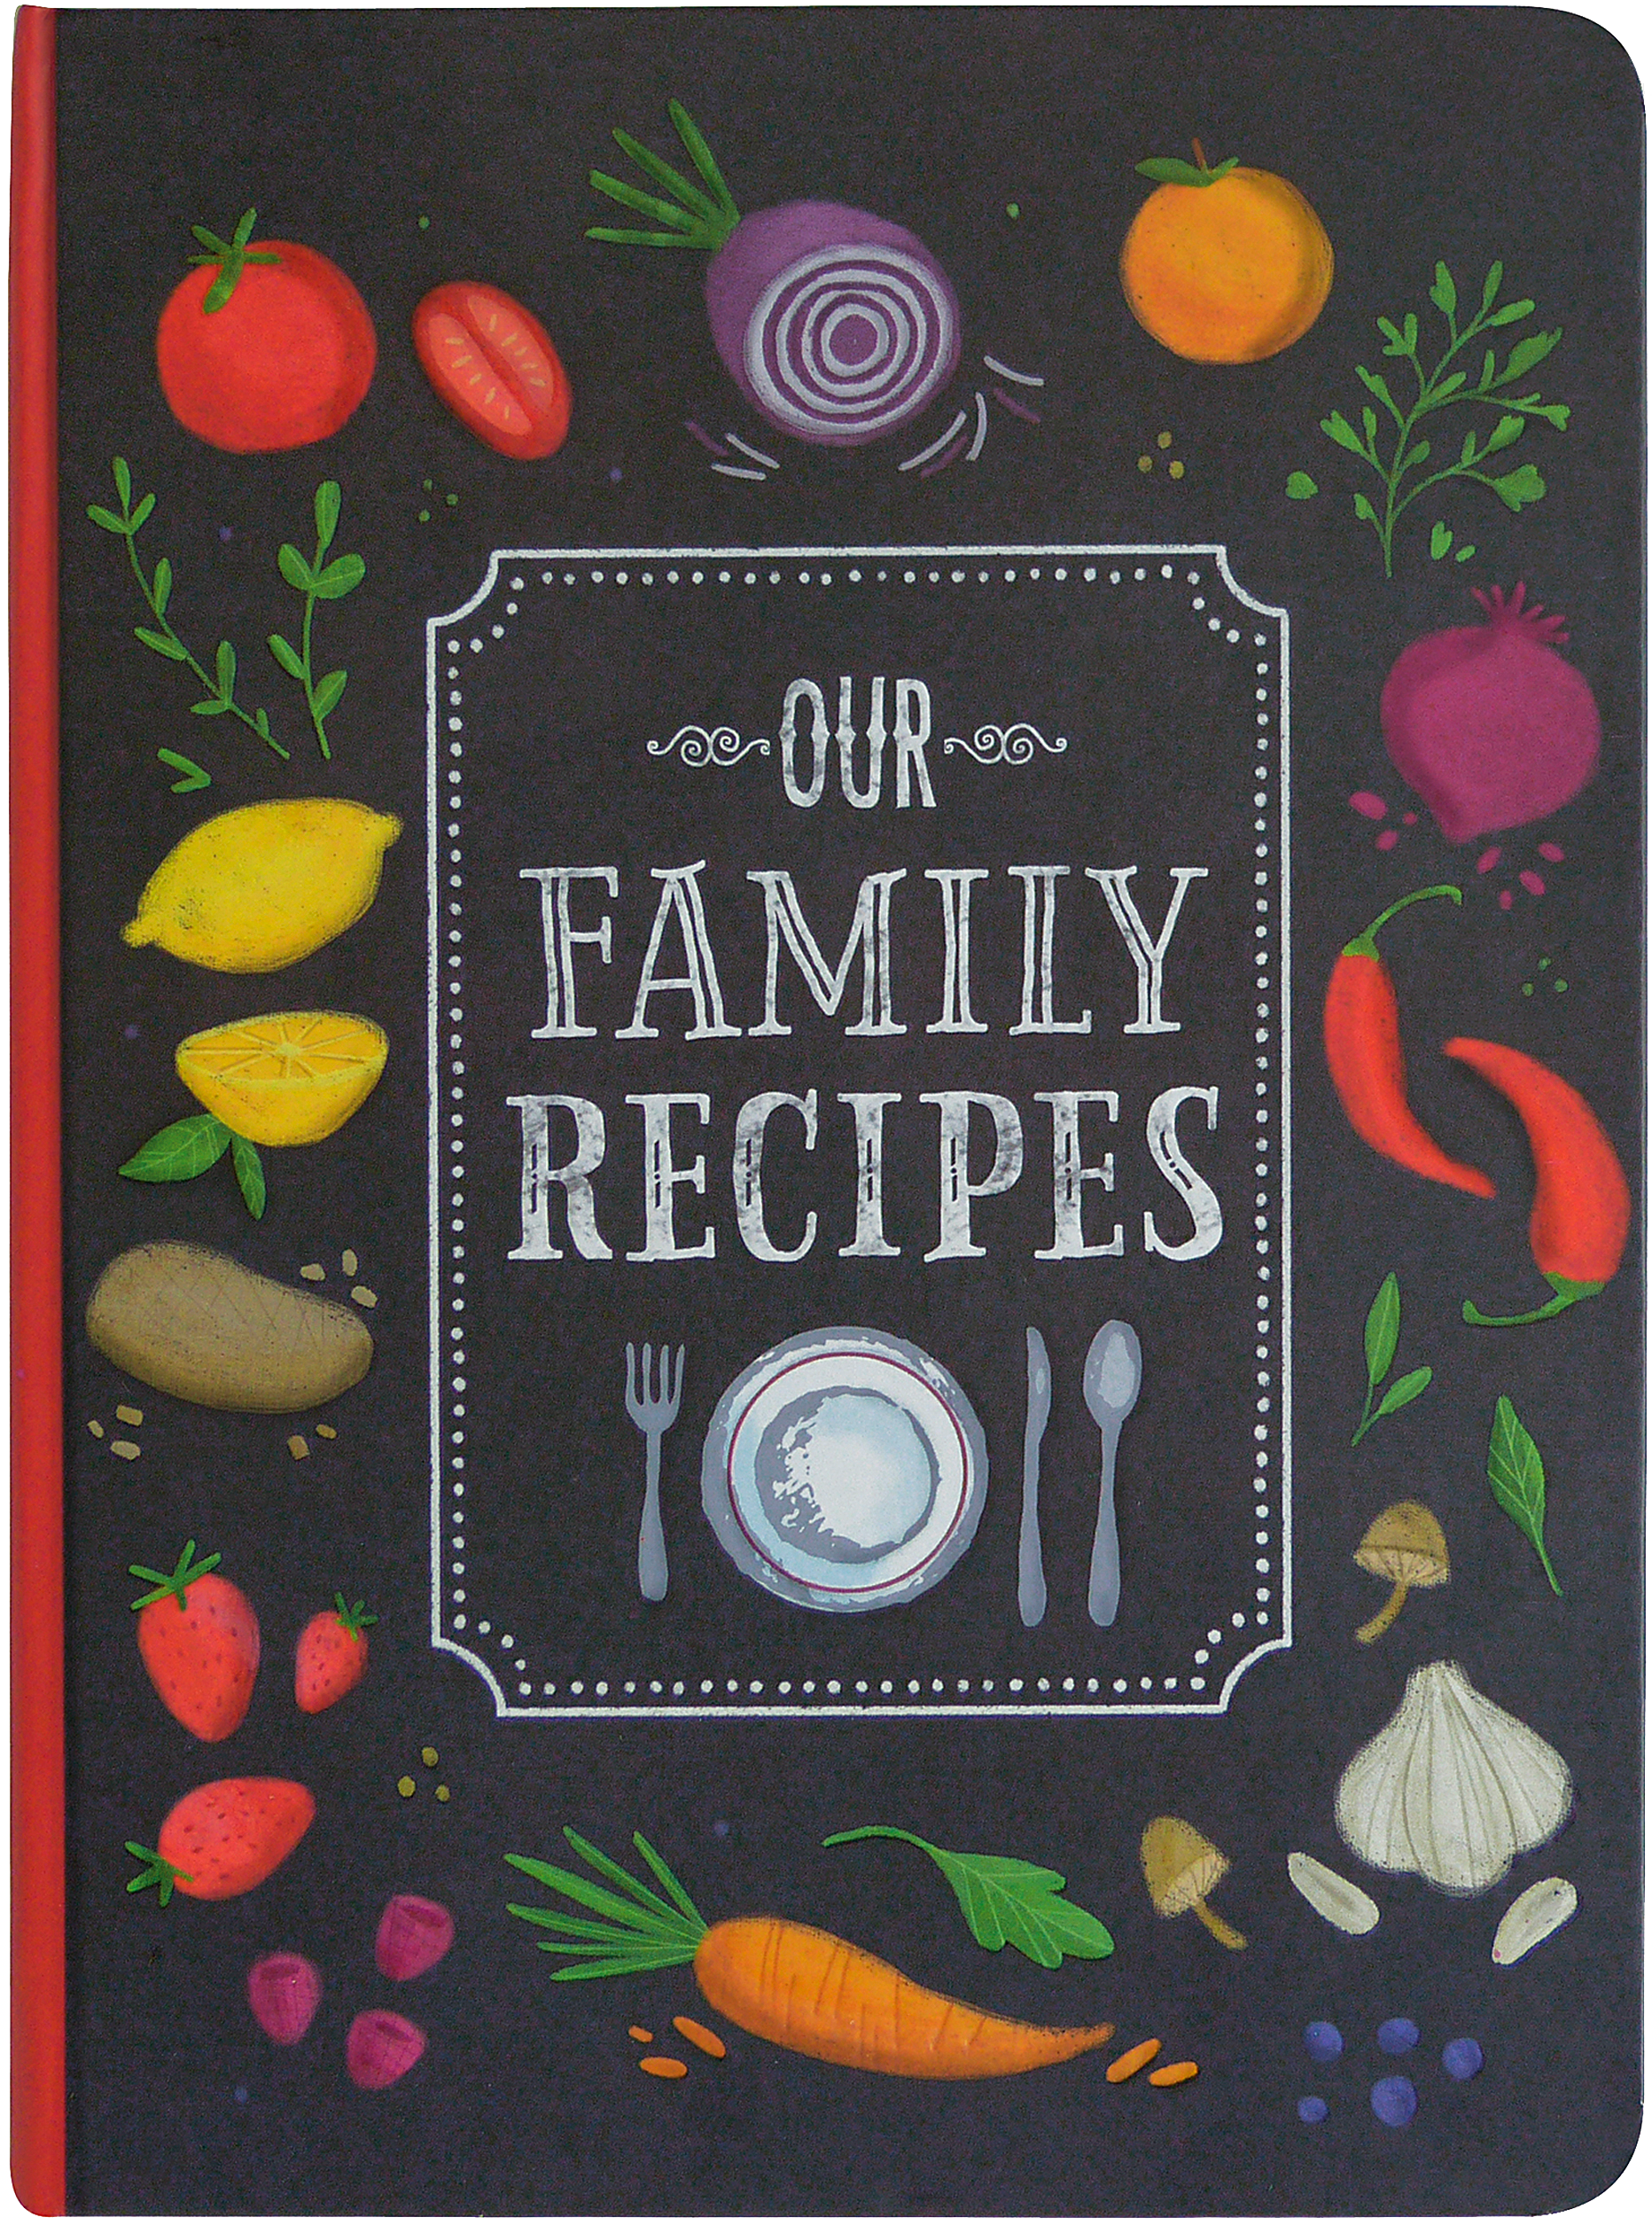 Our Family Recipes: - an 8.5 by 11 Inch Soft Cover Journal, with a Template  on Each Page to Fill in a Treasured Family Recipe